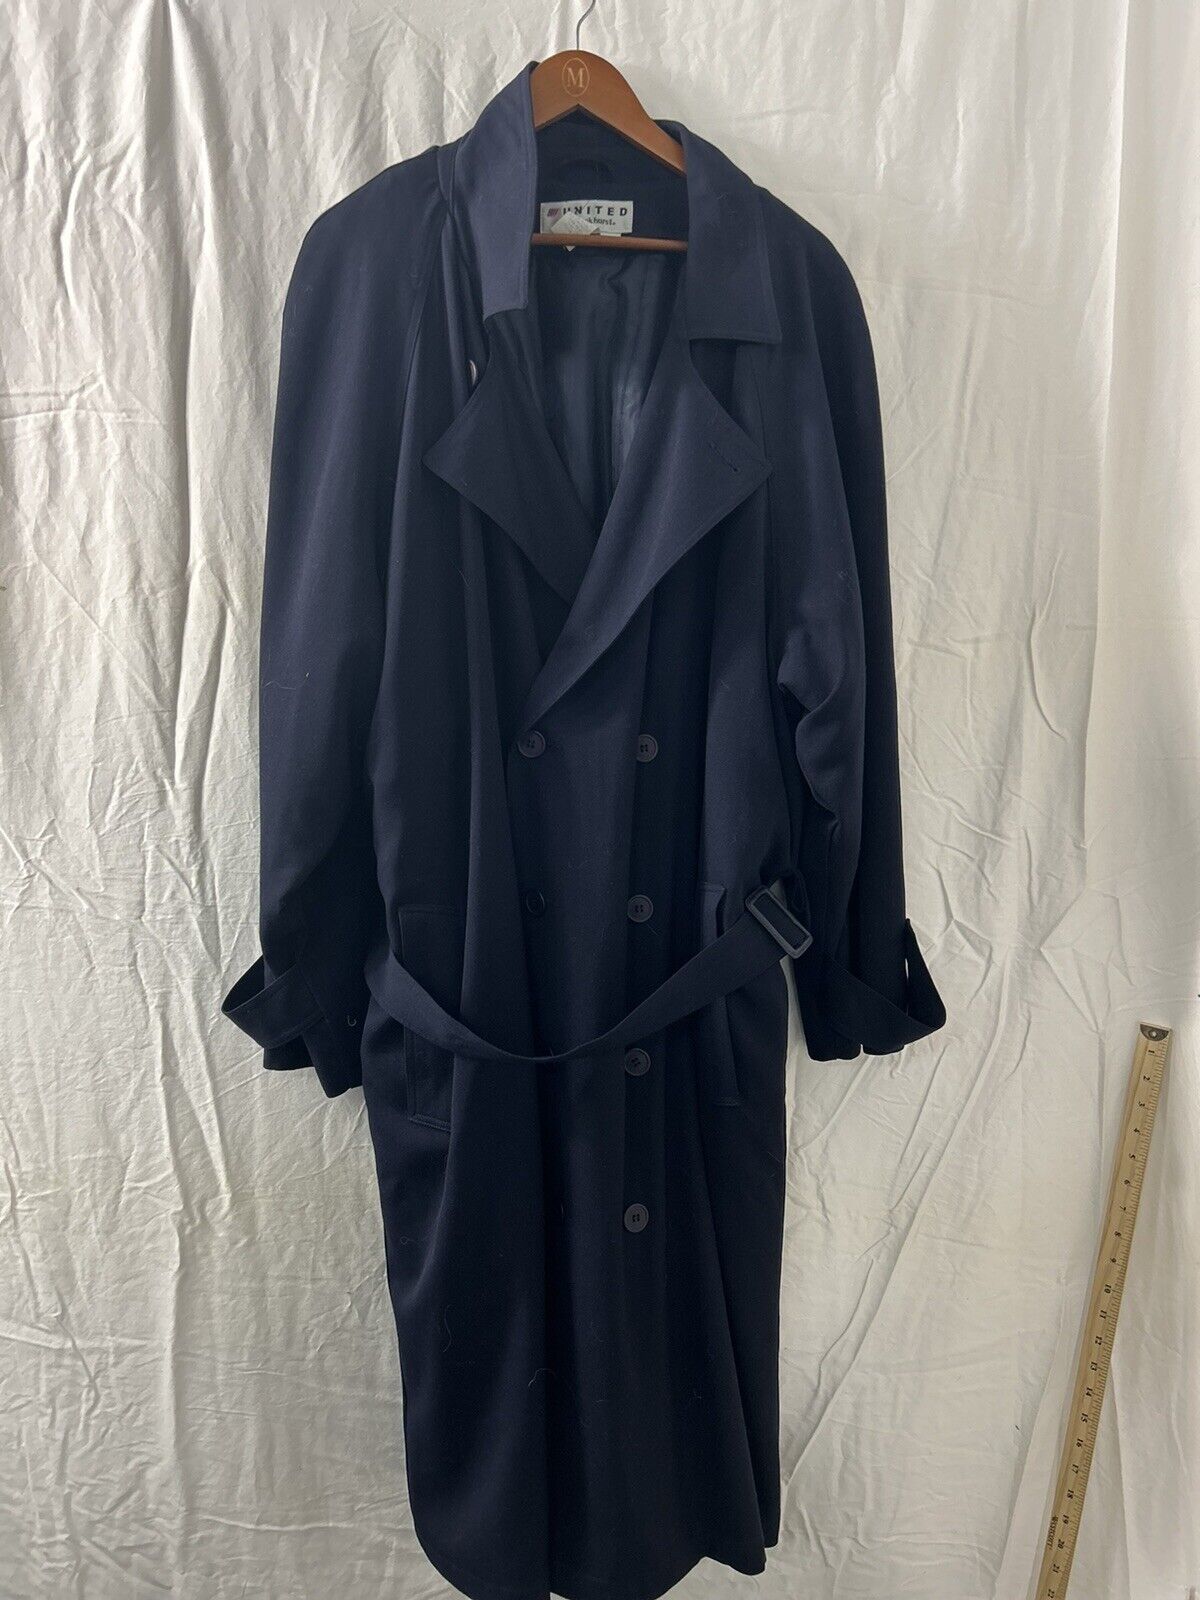 Vintage United Airlines Brookhurst Navy Trench Coat Zip Lined Size 48R 100% Wool